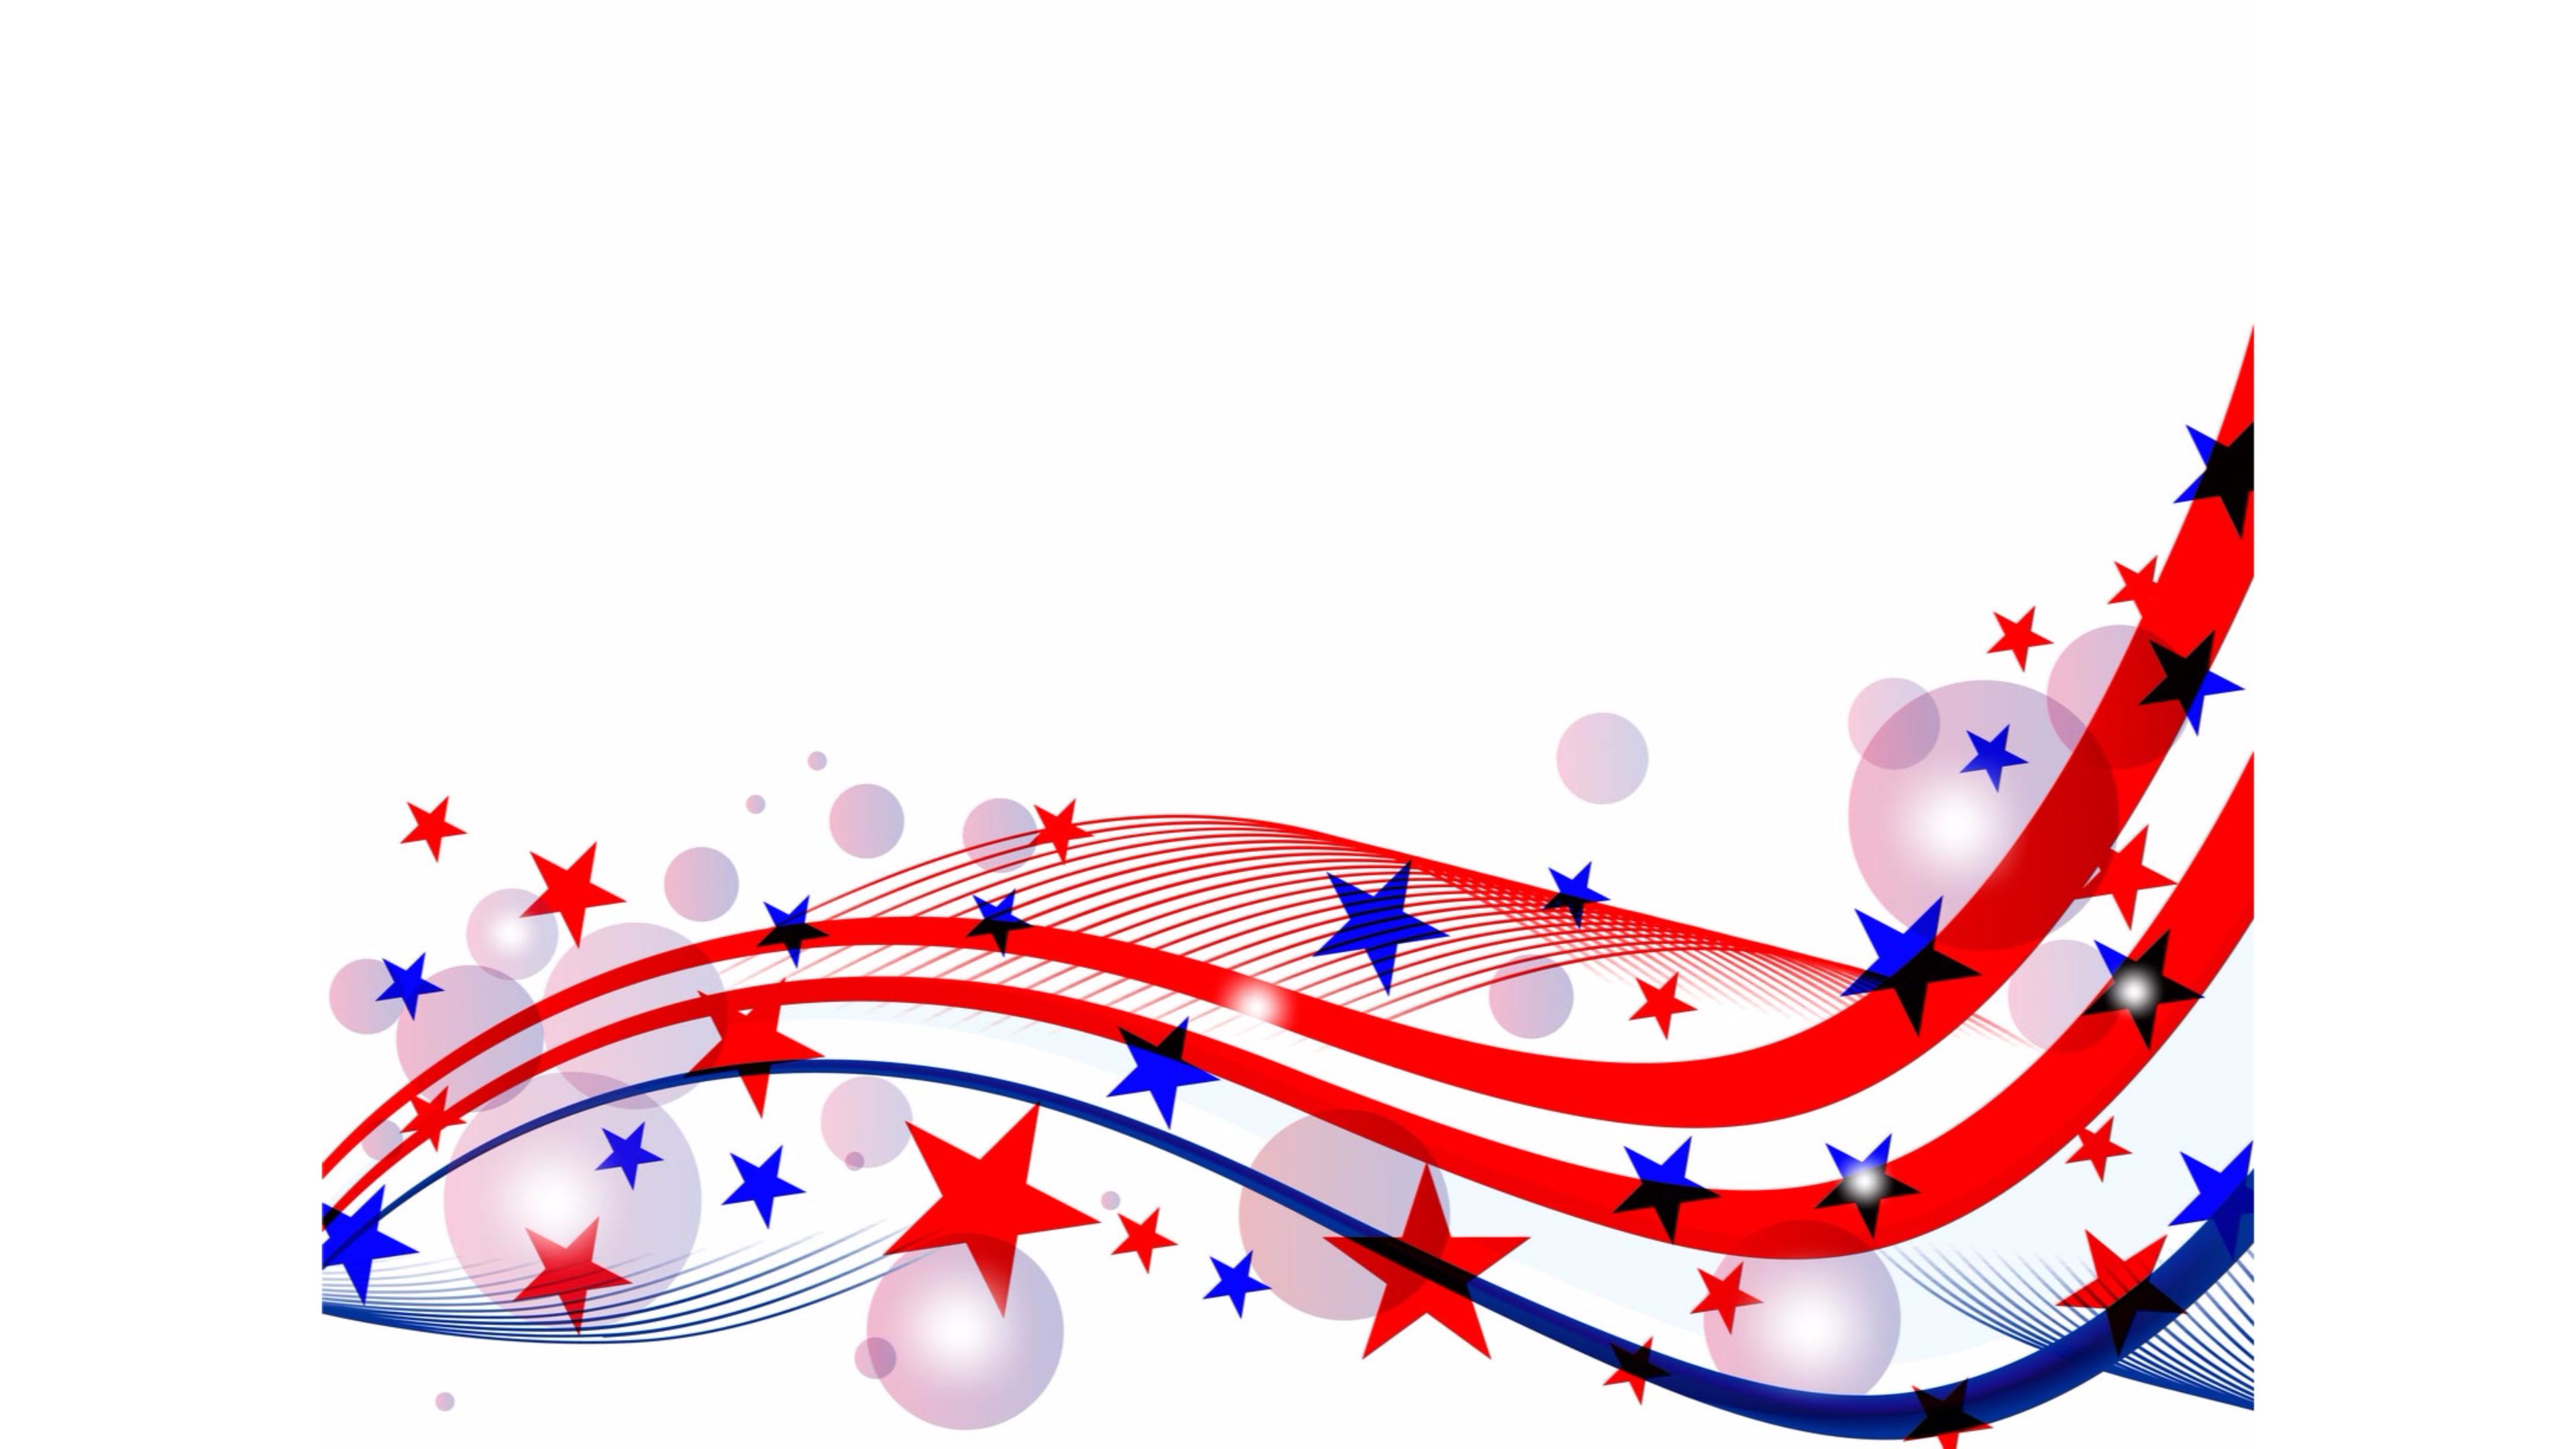 4th Of July 2021 Wallpapers  Top 25 Best Happy 4th Of July Background  Images